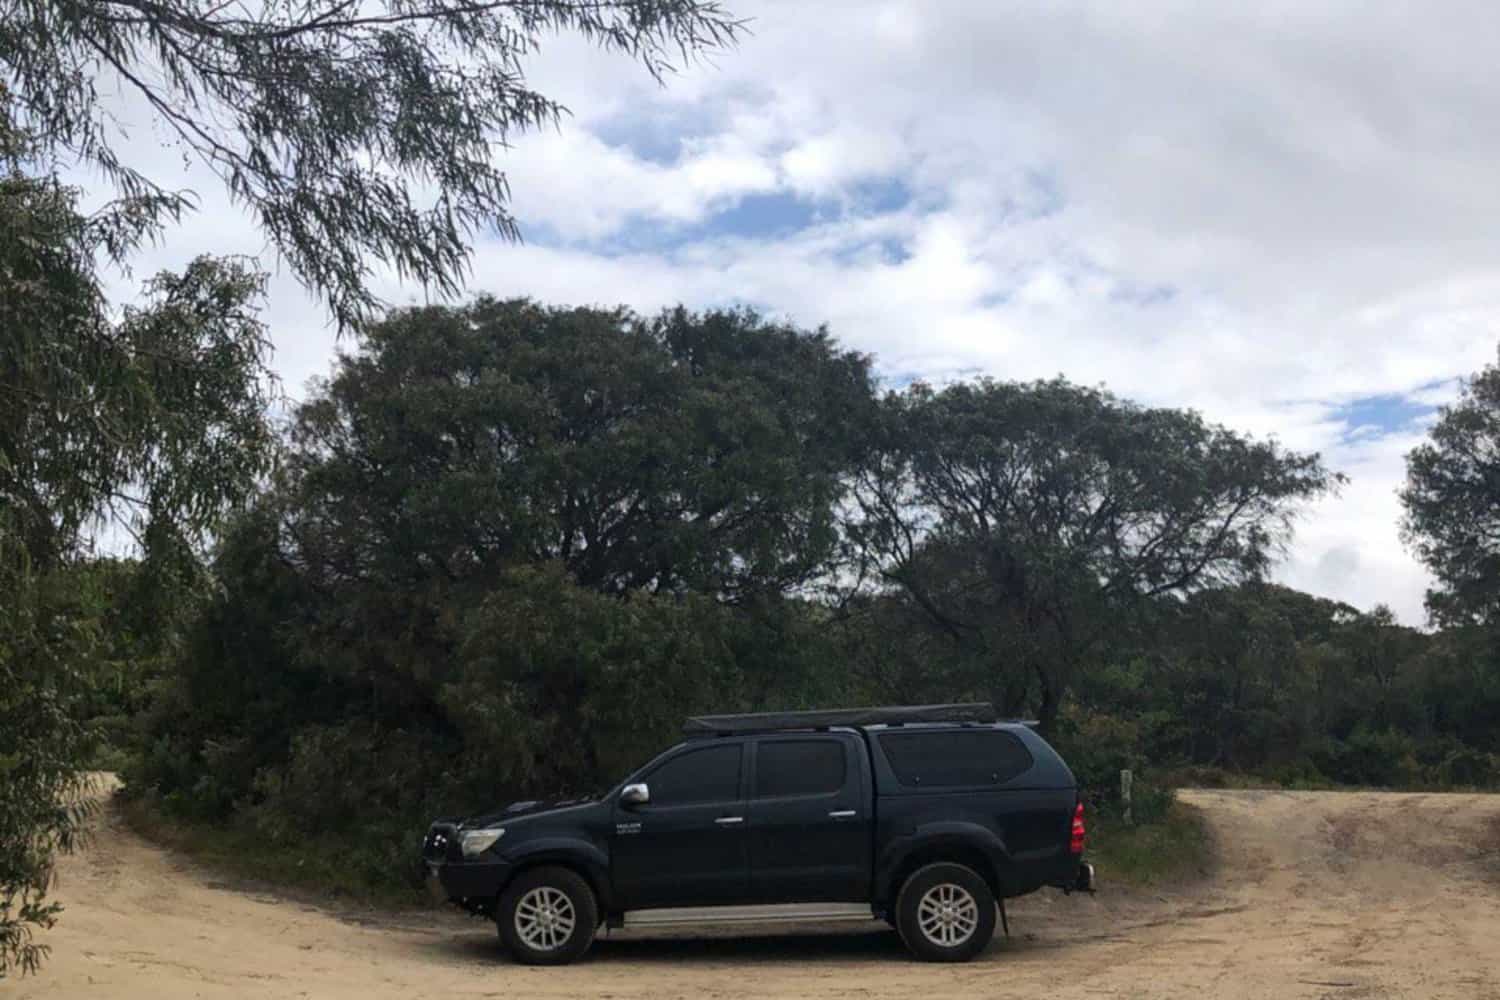 A black SUV parked on a sandy trail surrounded by dense Australian bushland under an overcast sky, indicating a day out in the natural landscapes of Margaret River.